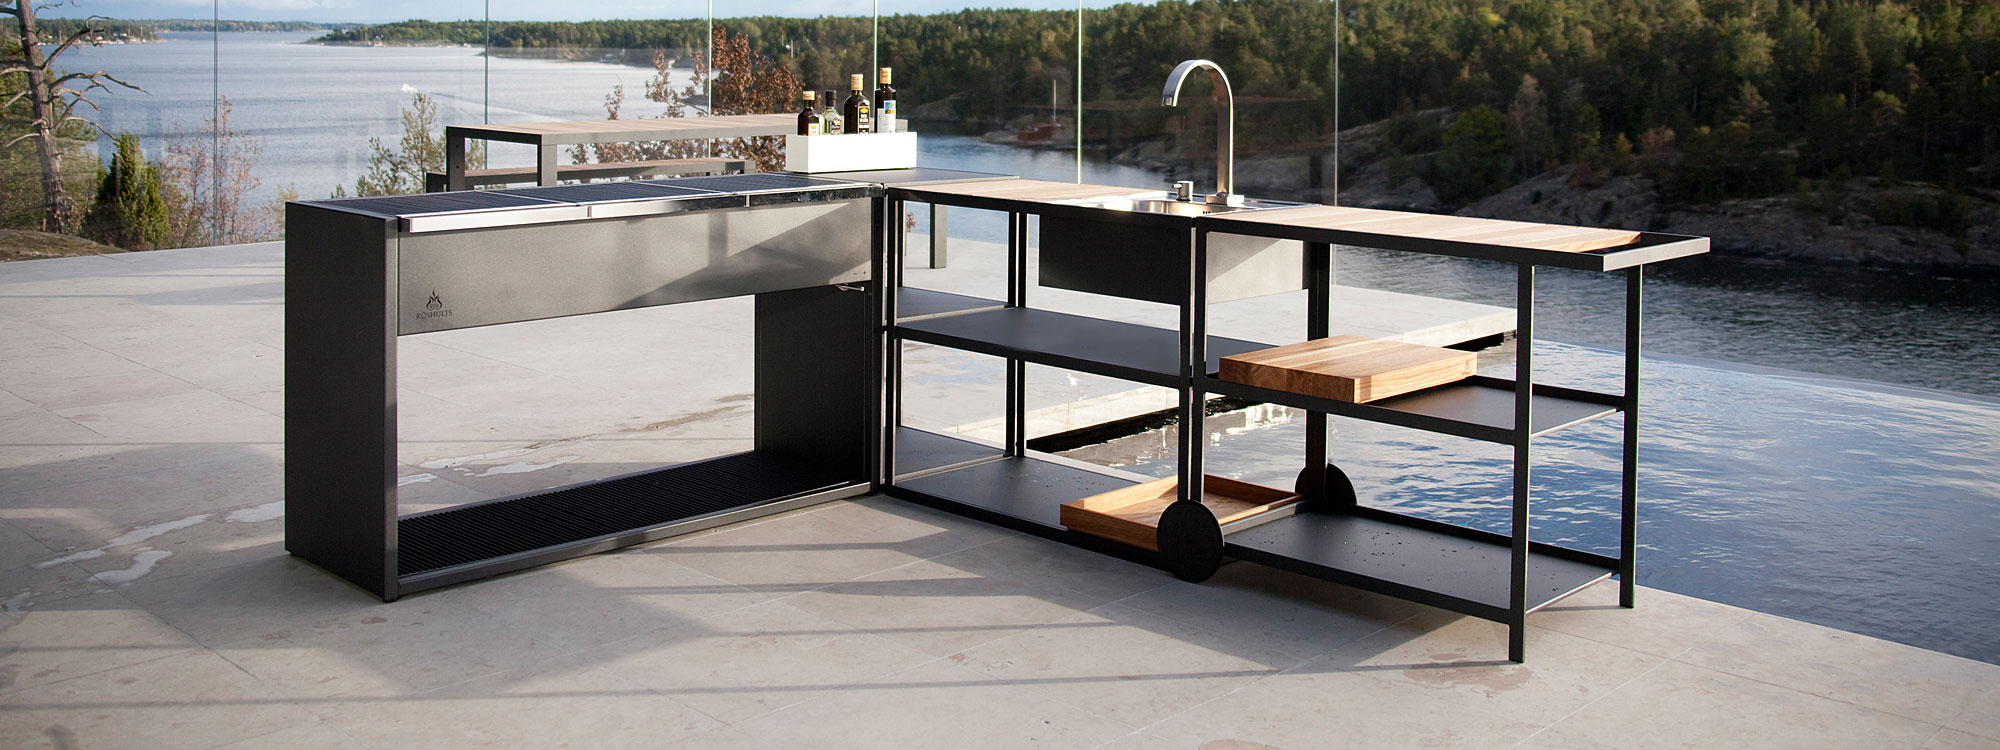 Image of Roshults Garden Trolley in anthracite aluminium with teak slatted top